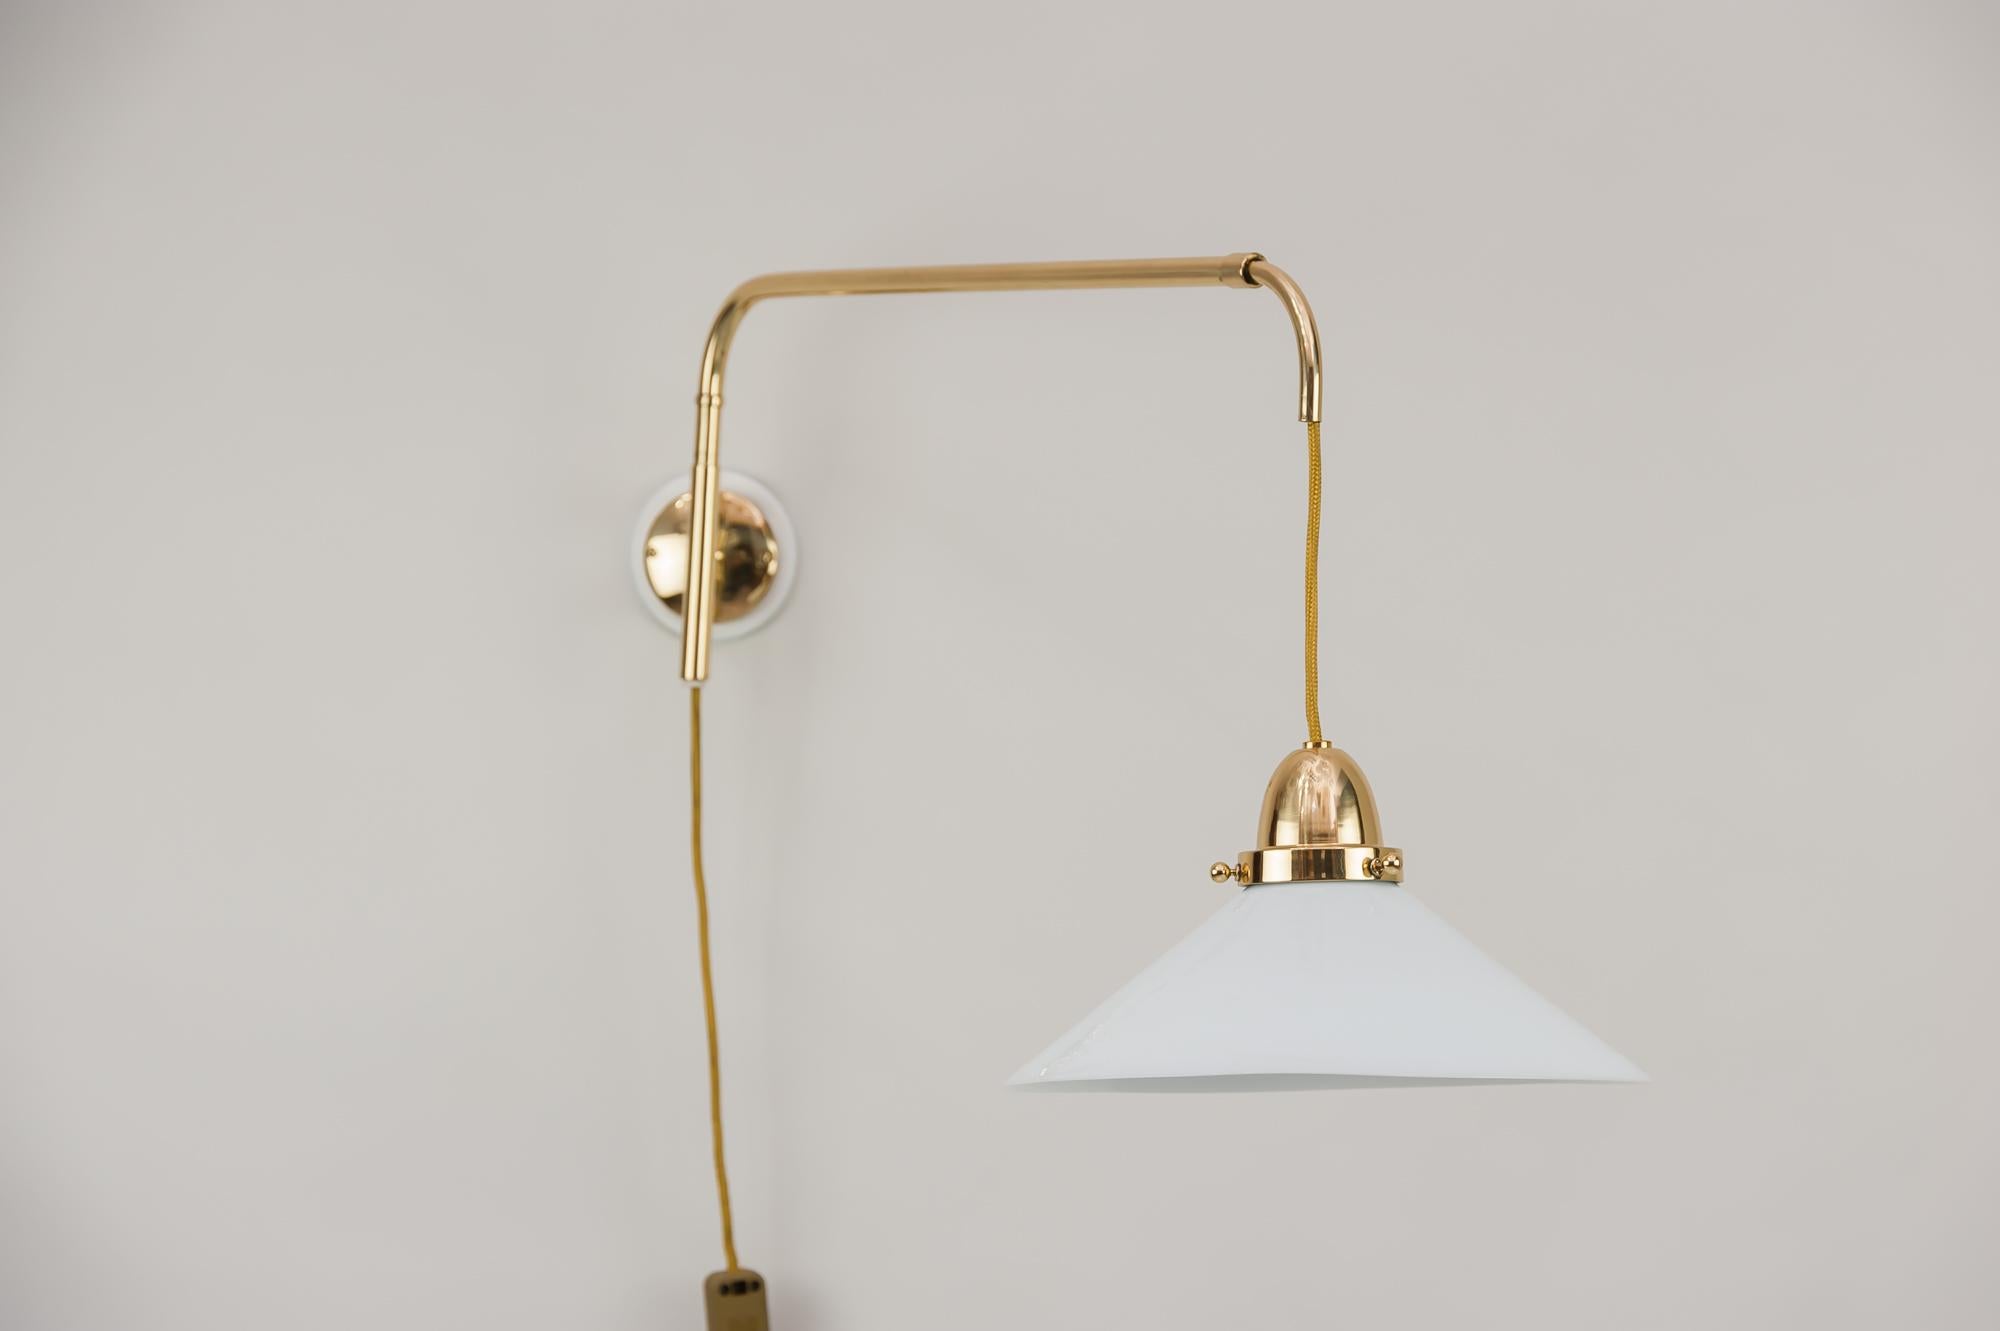 Austrian Art Deco Swivelling and Extendable Wall Lamp, circa 1920s